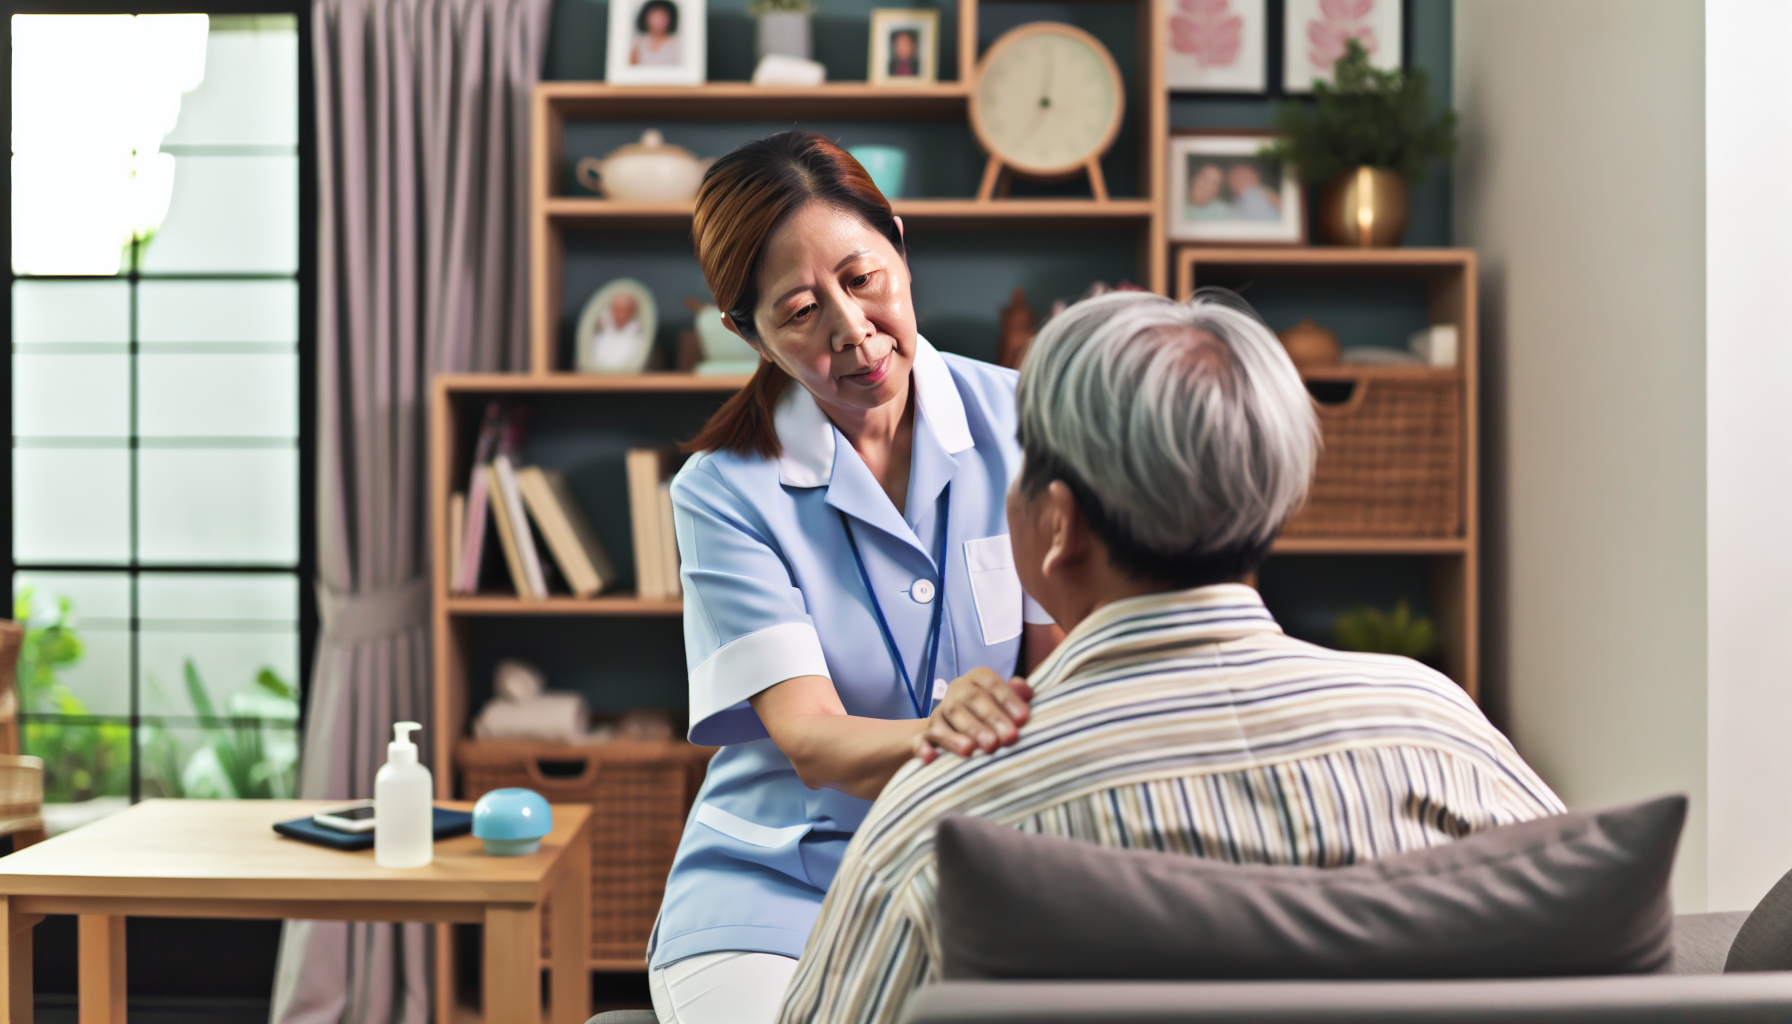 An elderly person receiving care at home from a home health aide